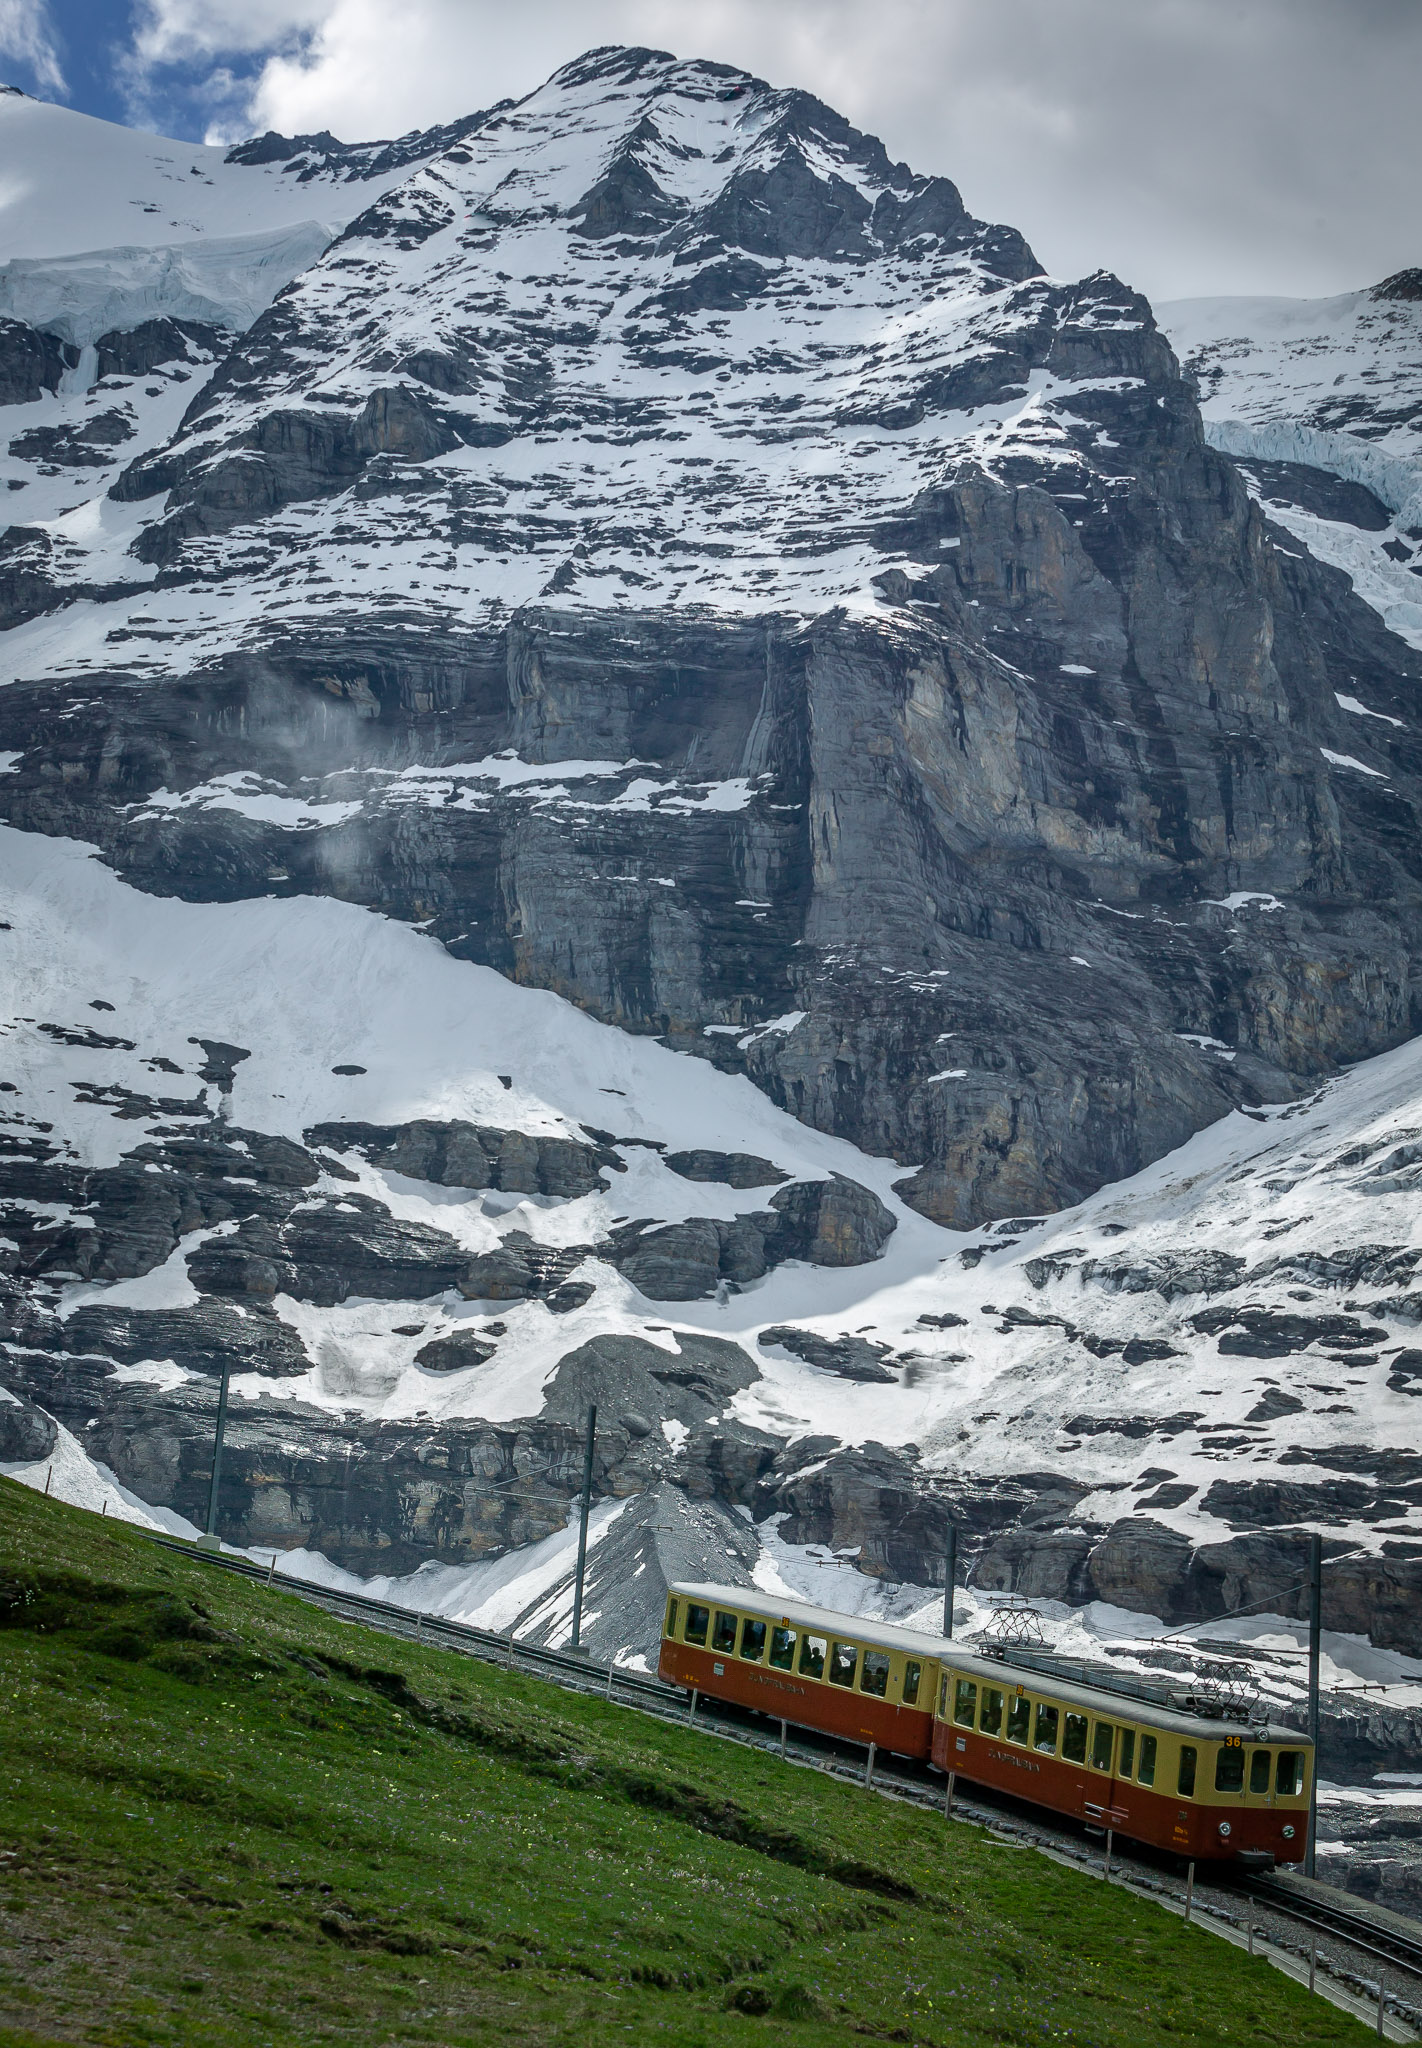 Cog railway up into the Eiger and then onto the Jungfraujoch